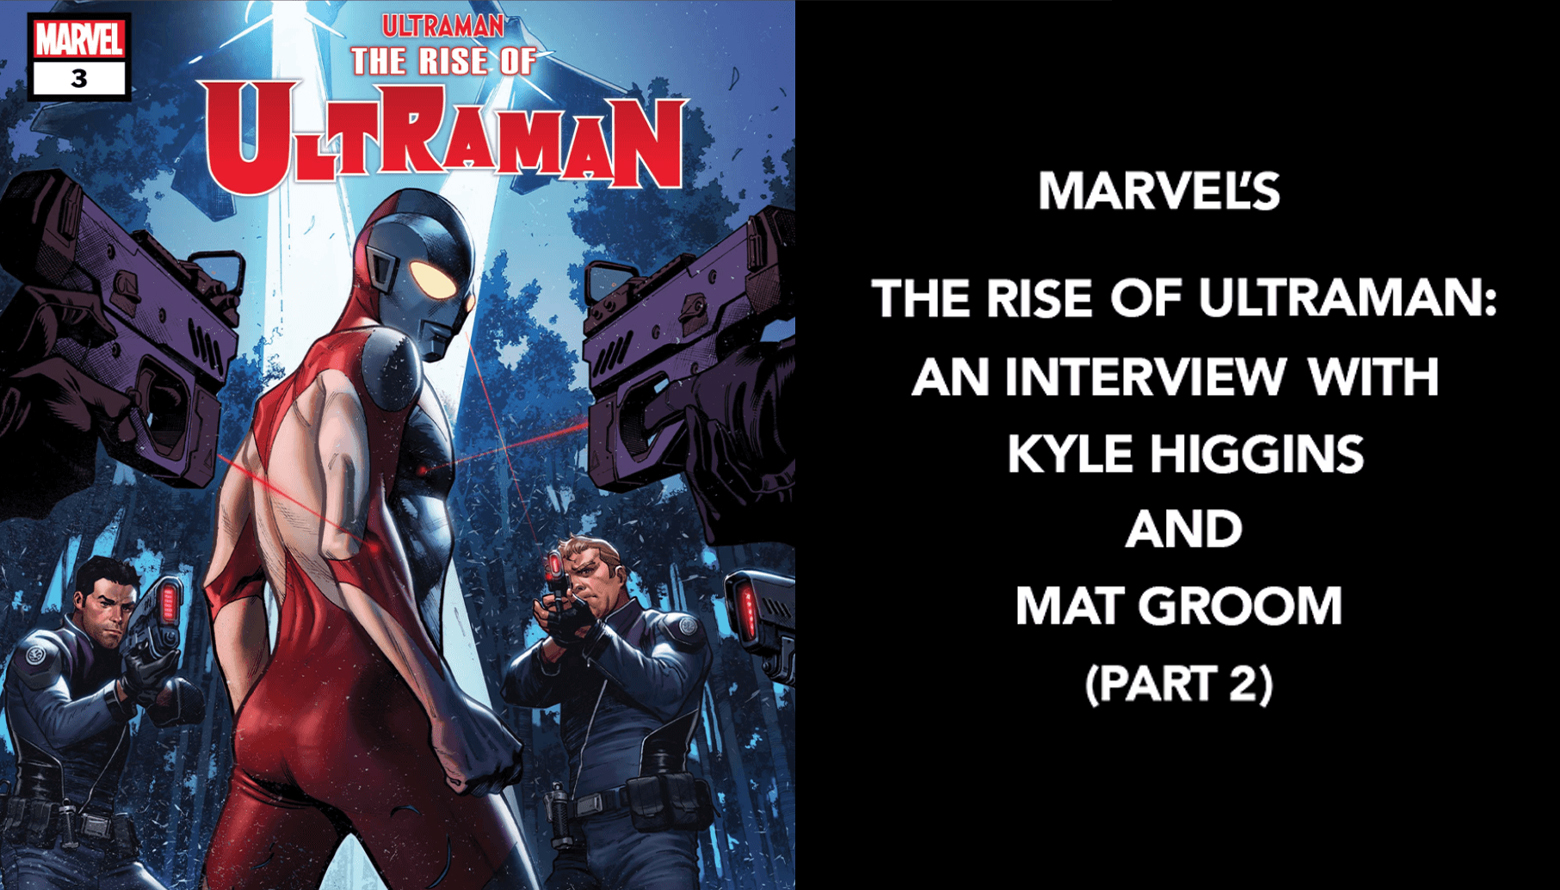 THE RISE OF ULTRAMAN:AN INTERVIEW WITH KYLE HIGGINS AND MAT GROOM (PART 2)